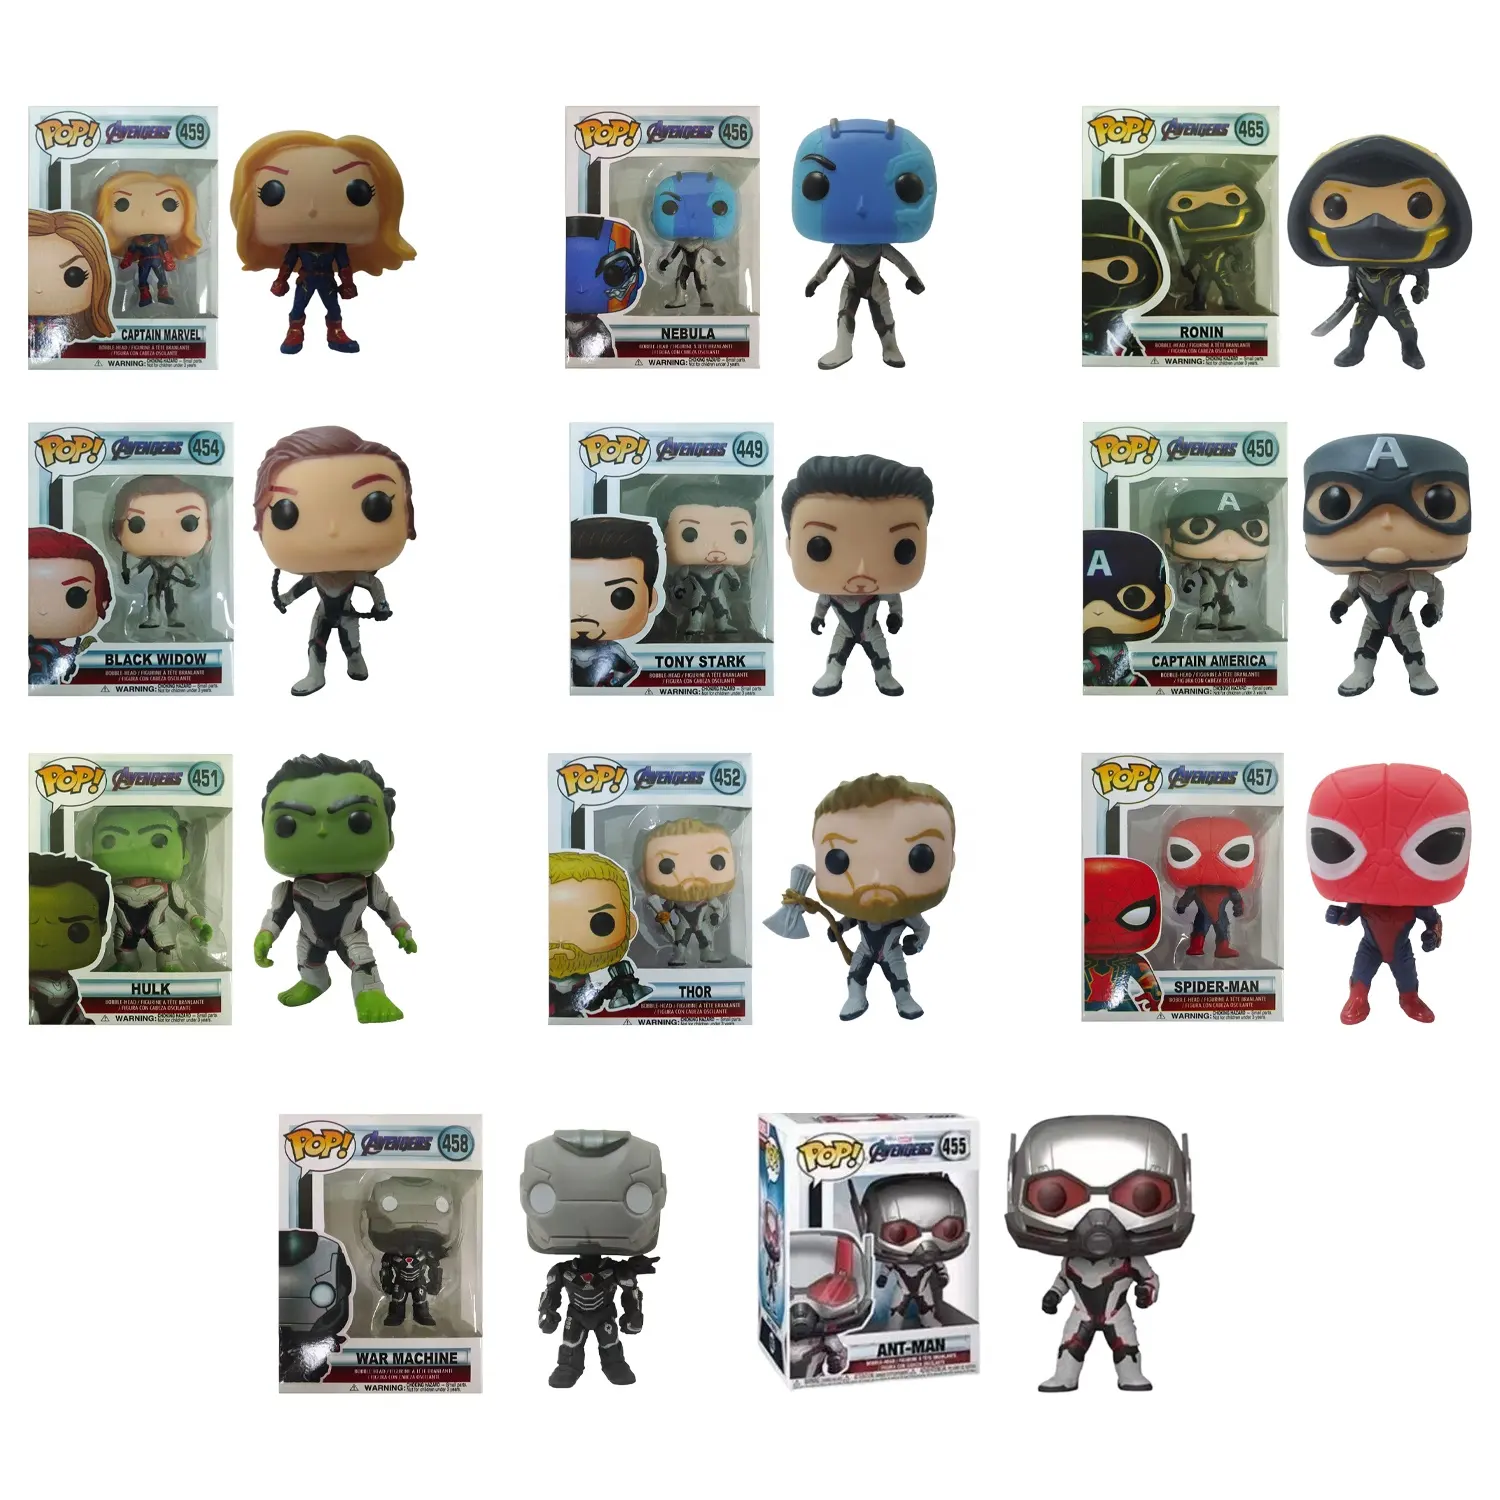 Marvel comic Movies Action model kids toys funko pop Avengers Super Hero Suit Collection Action Figures with funko pop protector